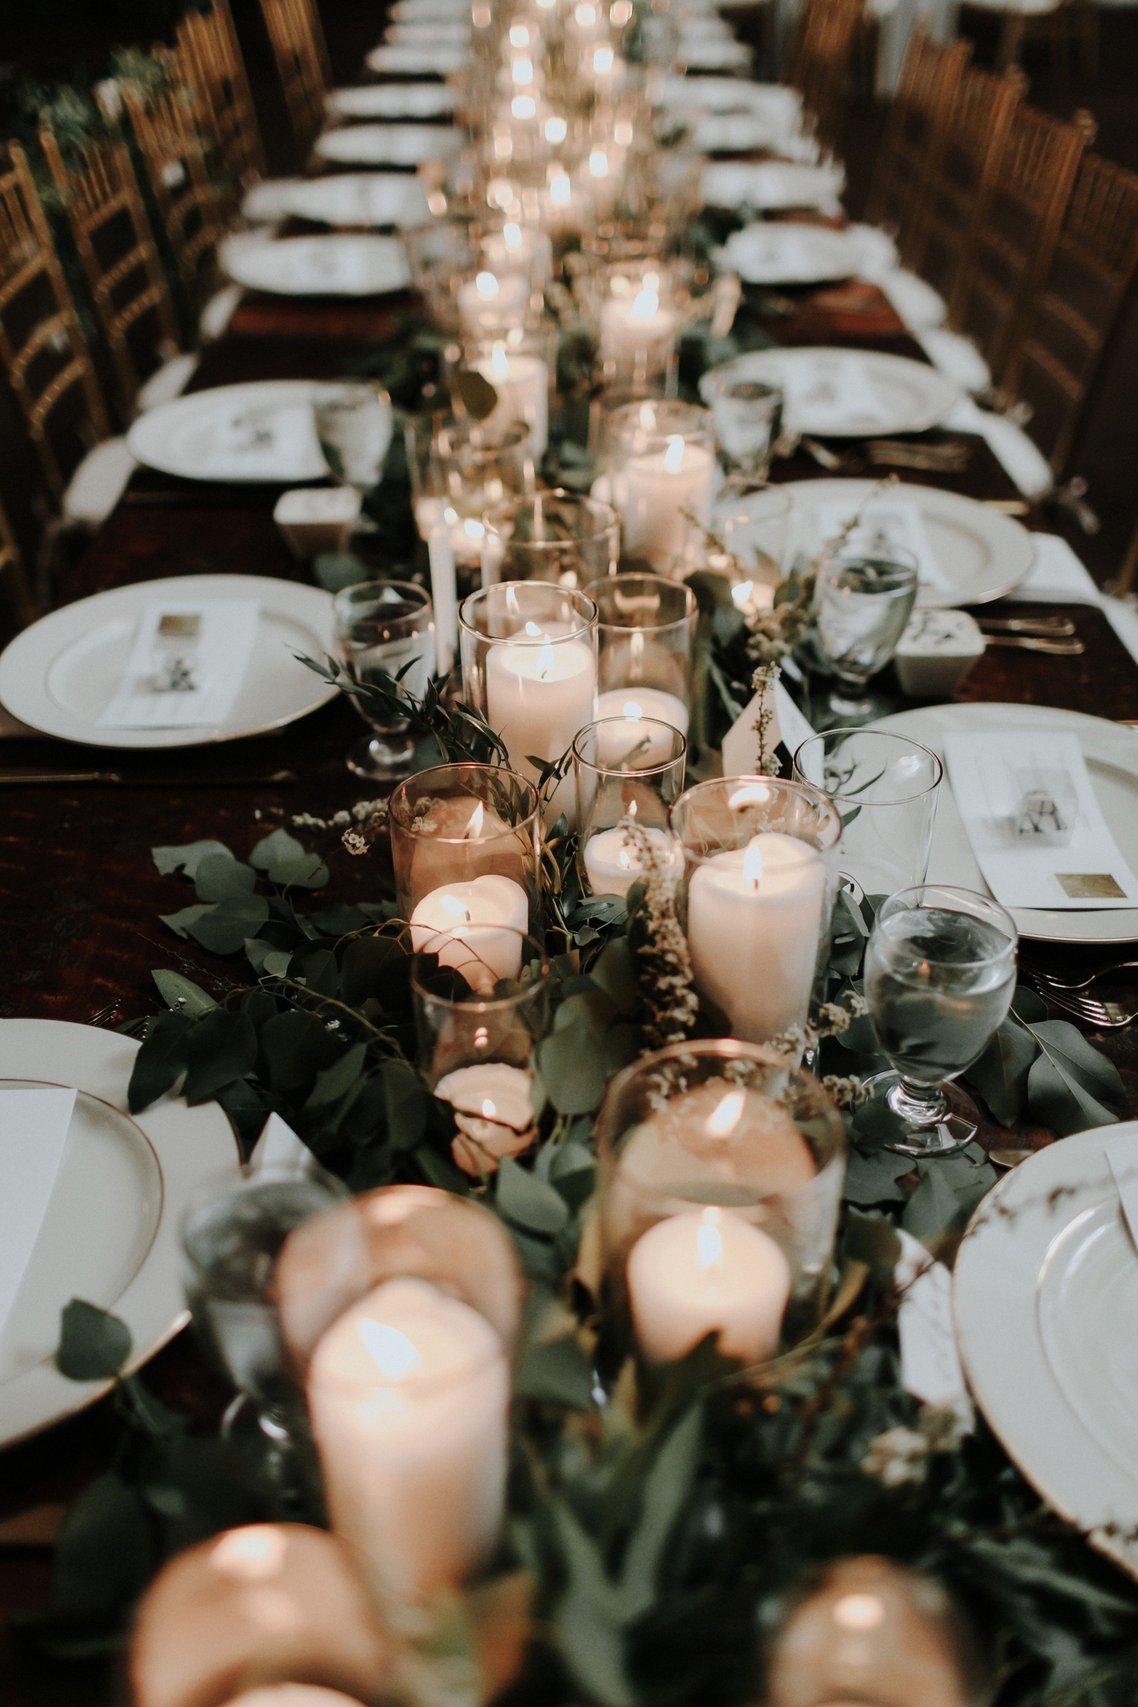 21 Romantic Wedding Theme Ideas for a Storybook-Inspired Day